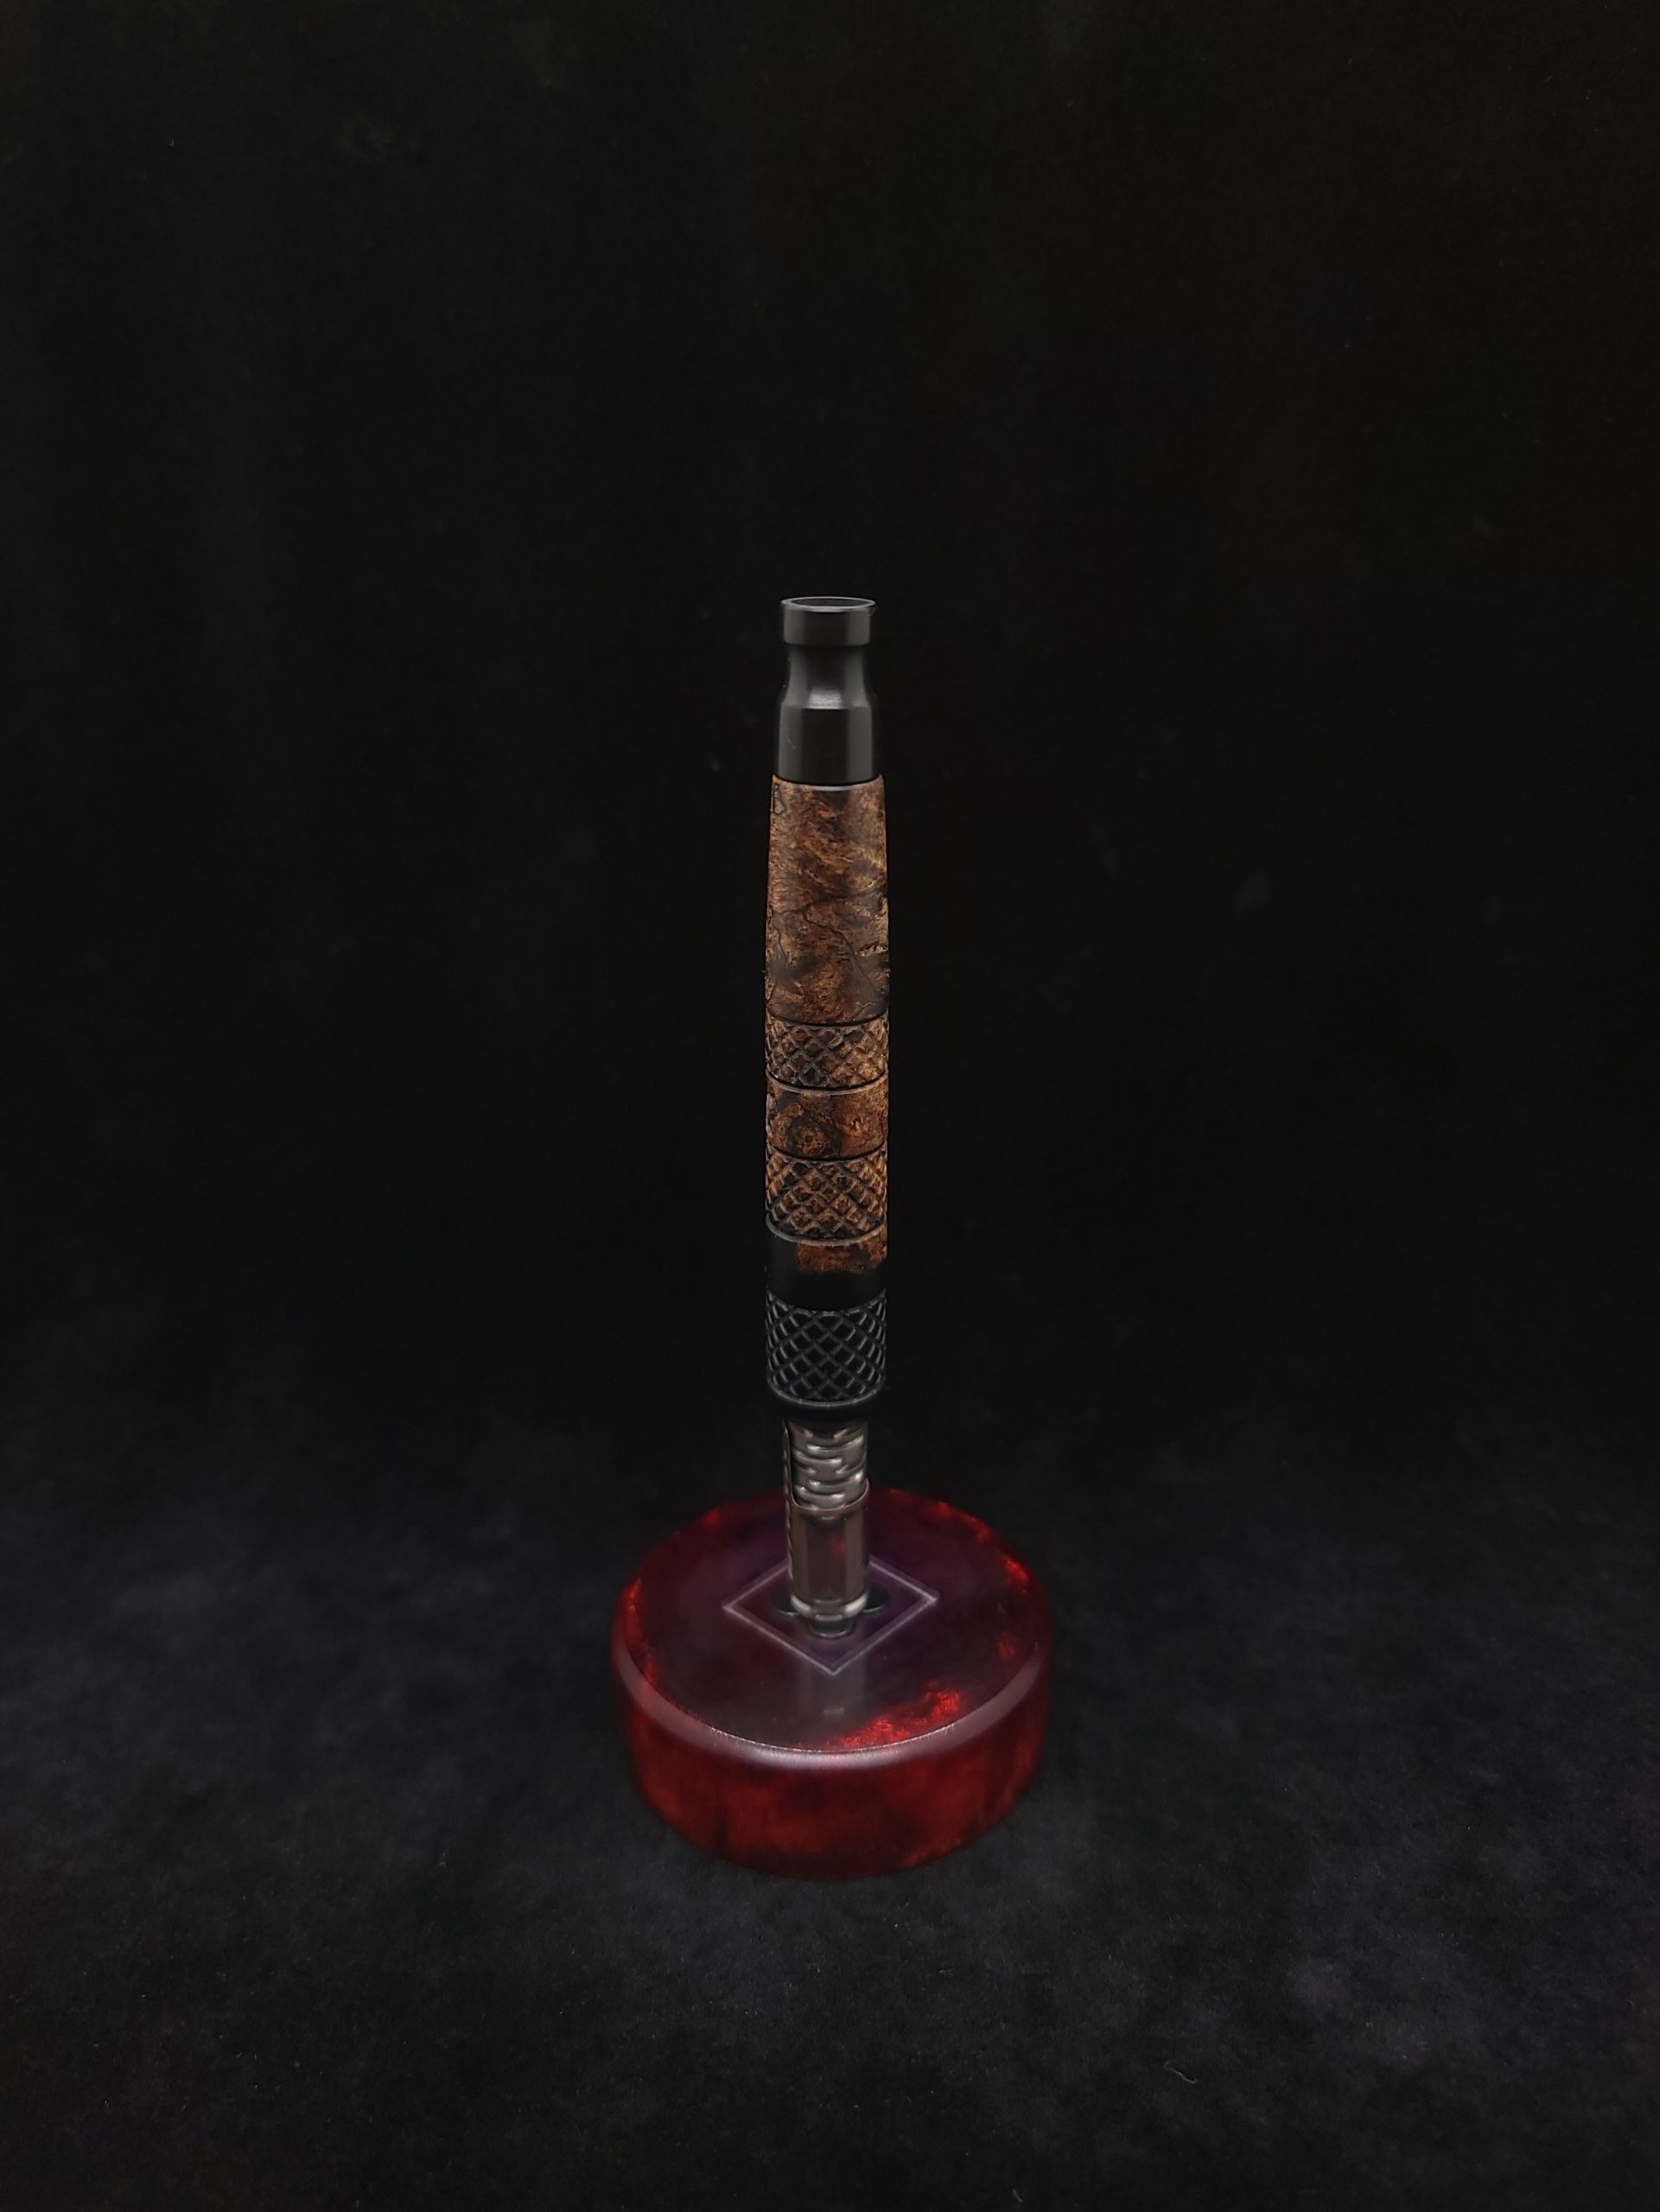 This image portrays High Class-Knurled XL Dynavap Stem/Matte Black Burl Hybrid + (2) Matching Mouthpiece by Dovetail Woodwork.